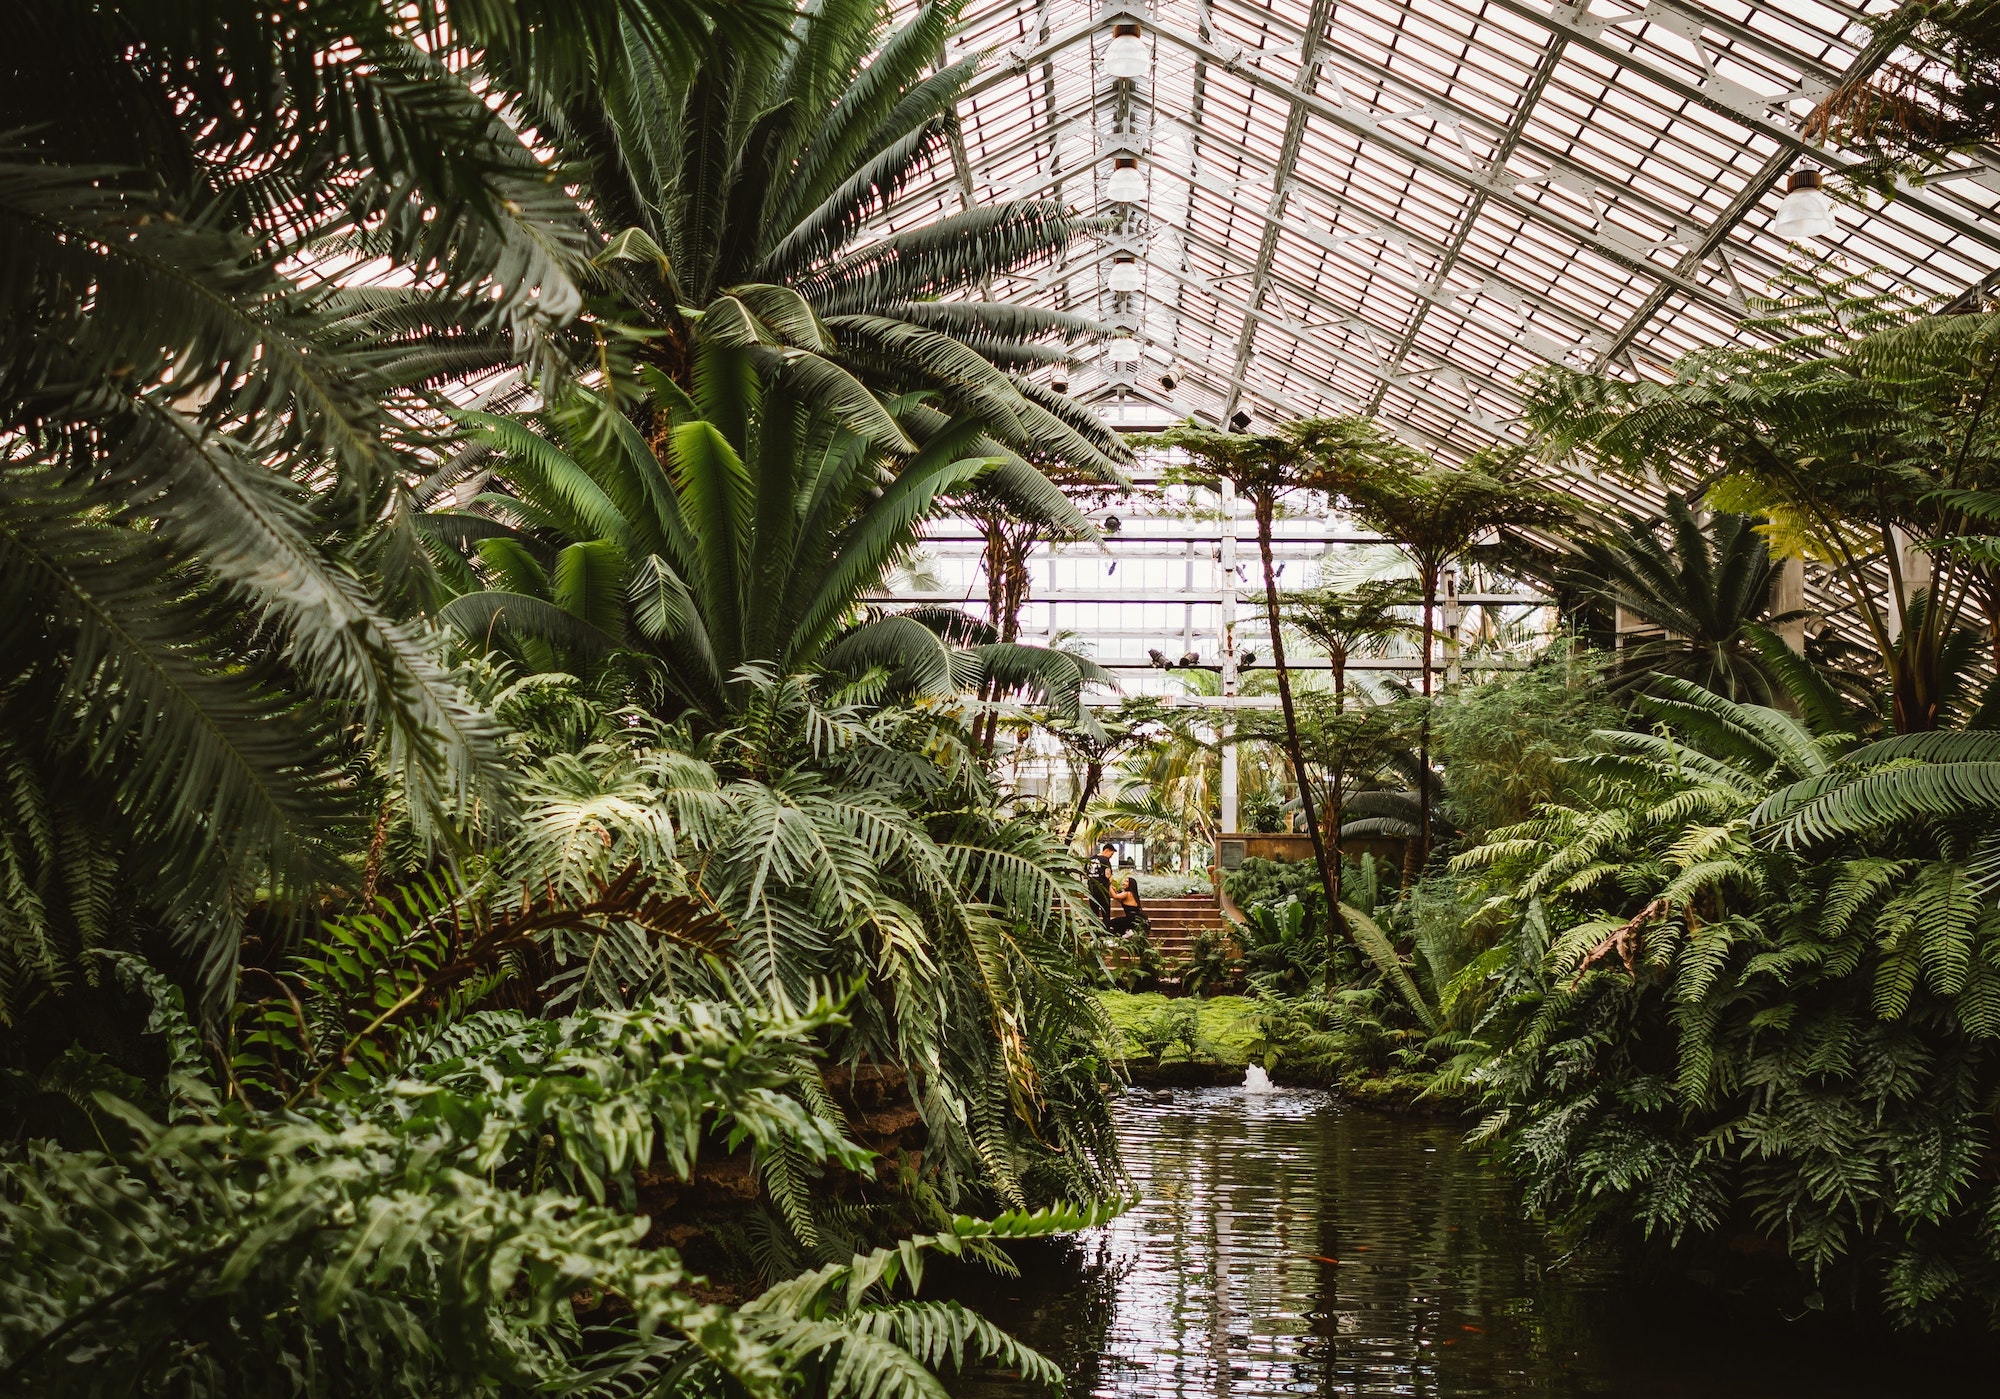 Inside view of a conservatory greenhouse with palms, ferns, and a pond. Feb. 2023